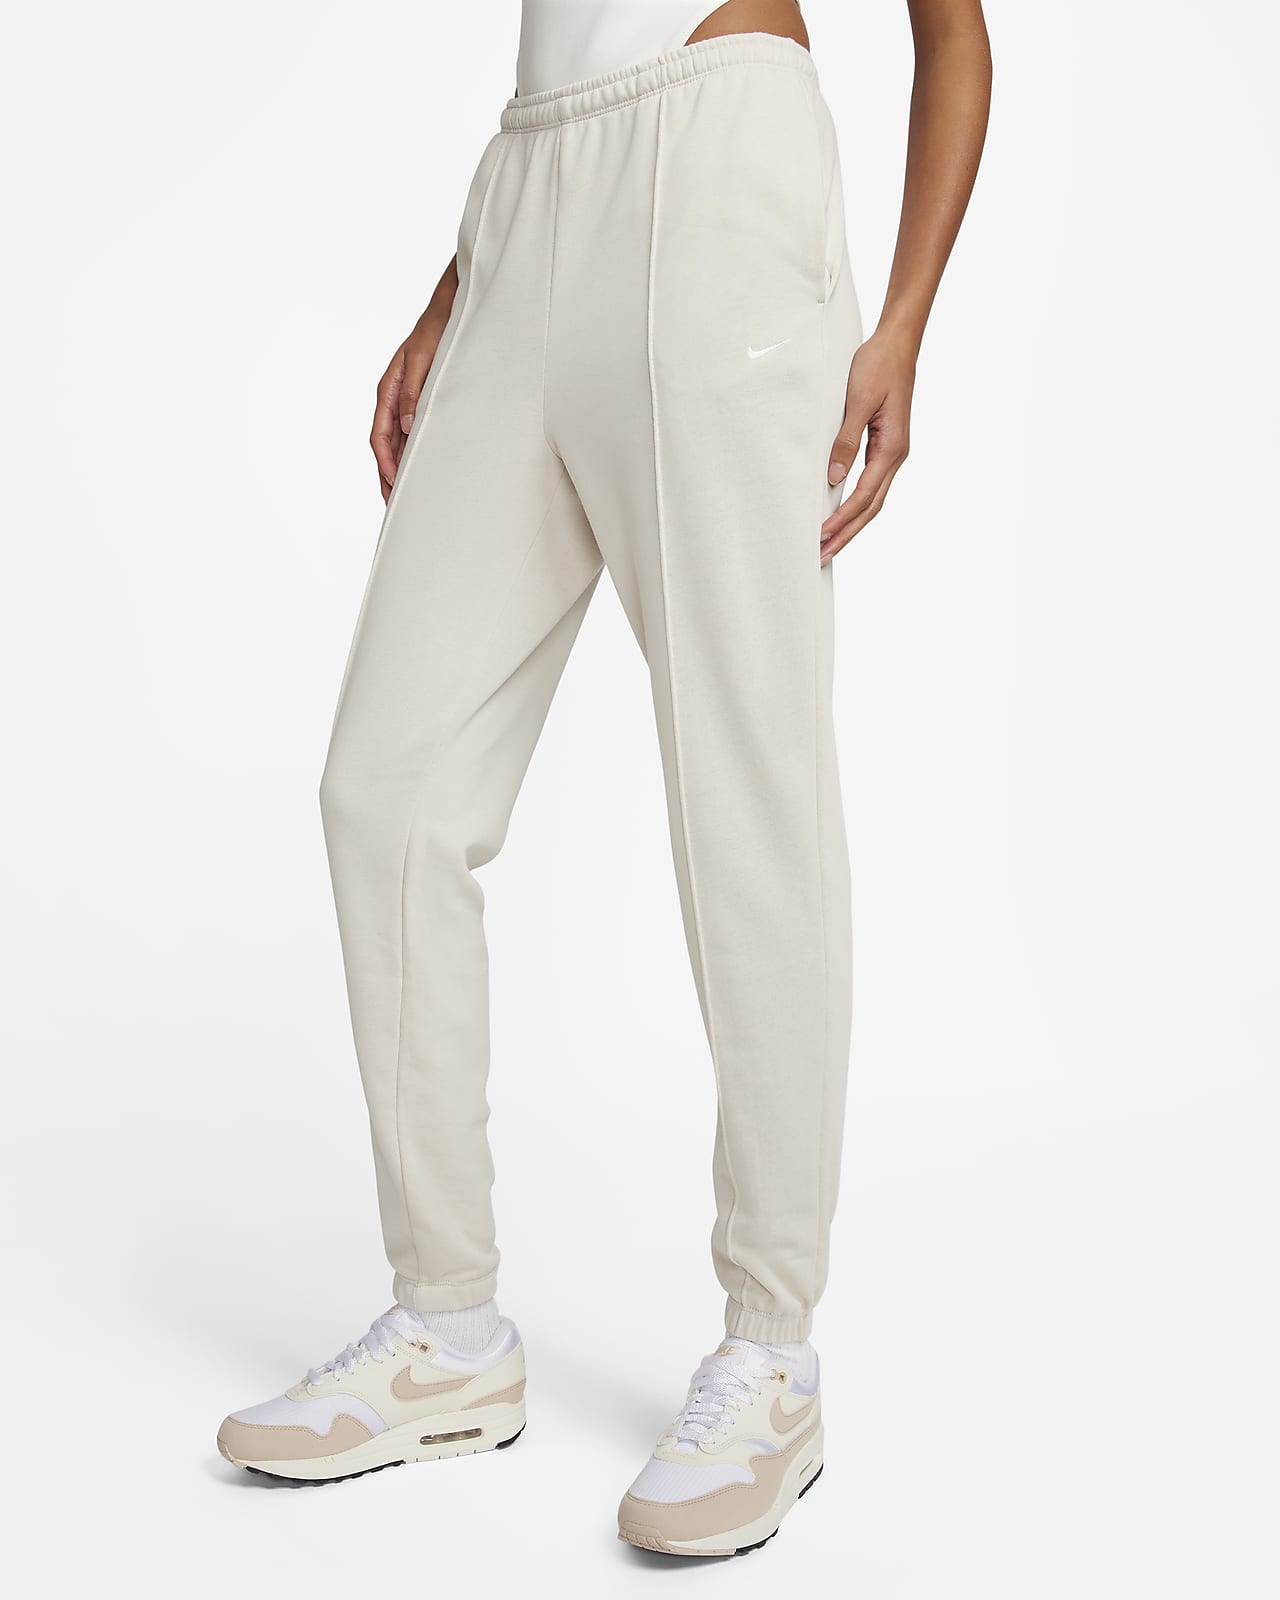 Nike Sportswear Chill Terry Women's Slim High-Waisted French Terry Tracksuit Bottoms